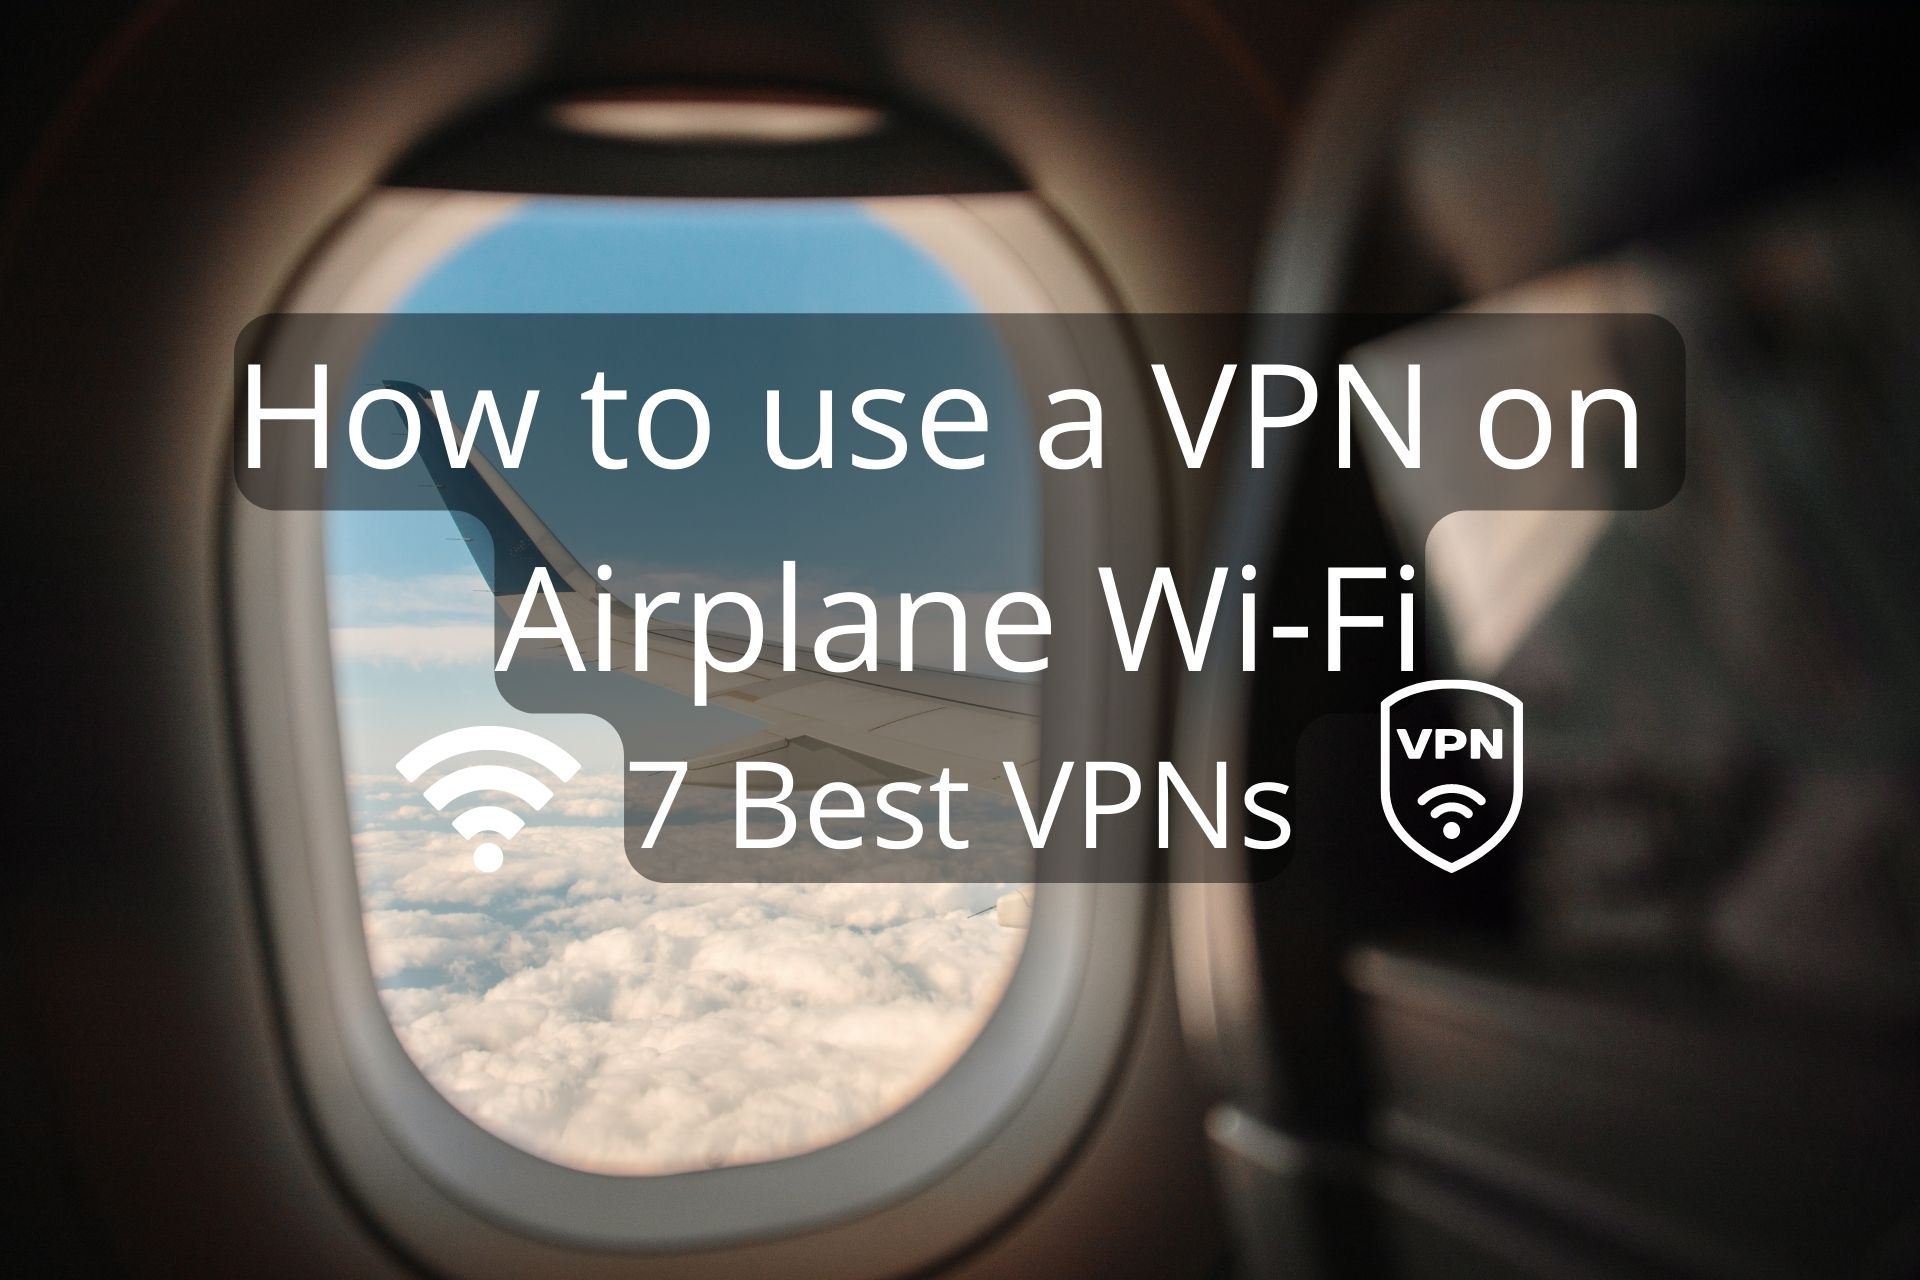 How to Use VPN on Airplane Wi-Fi? 7 Best Rated VPNs